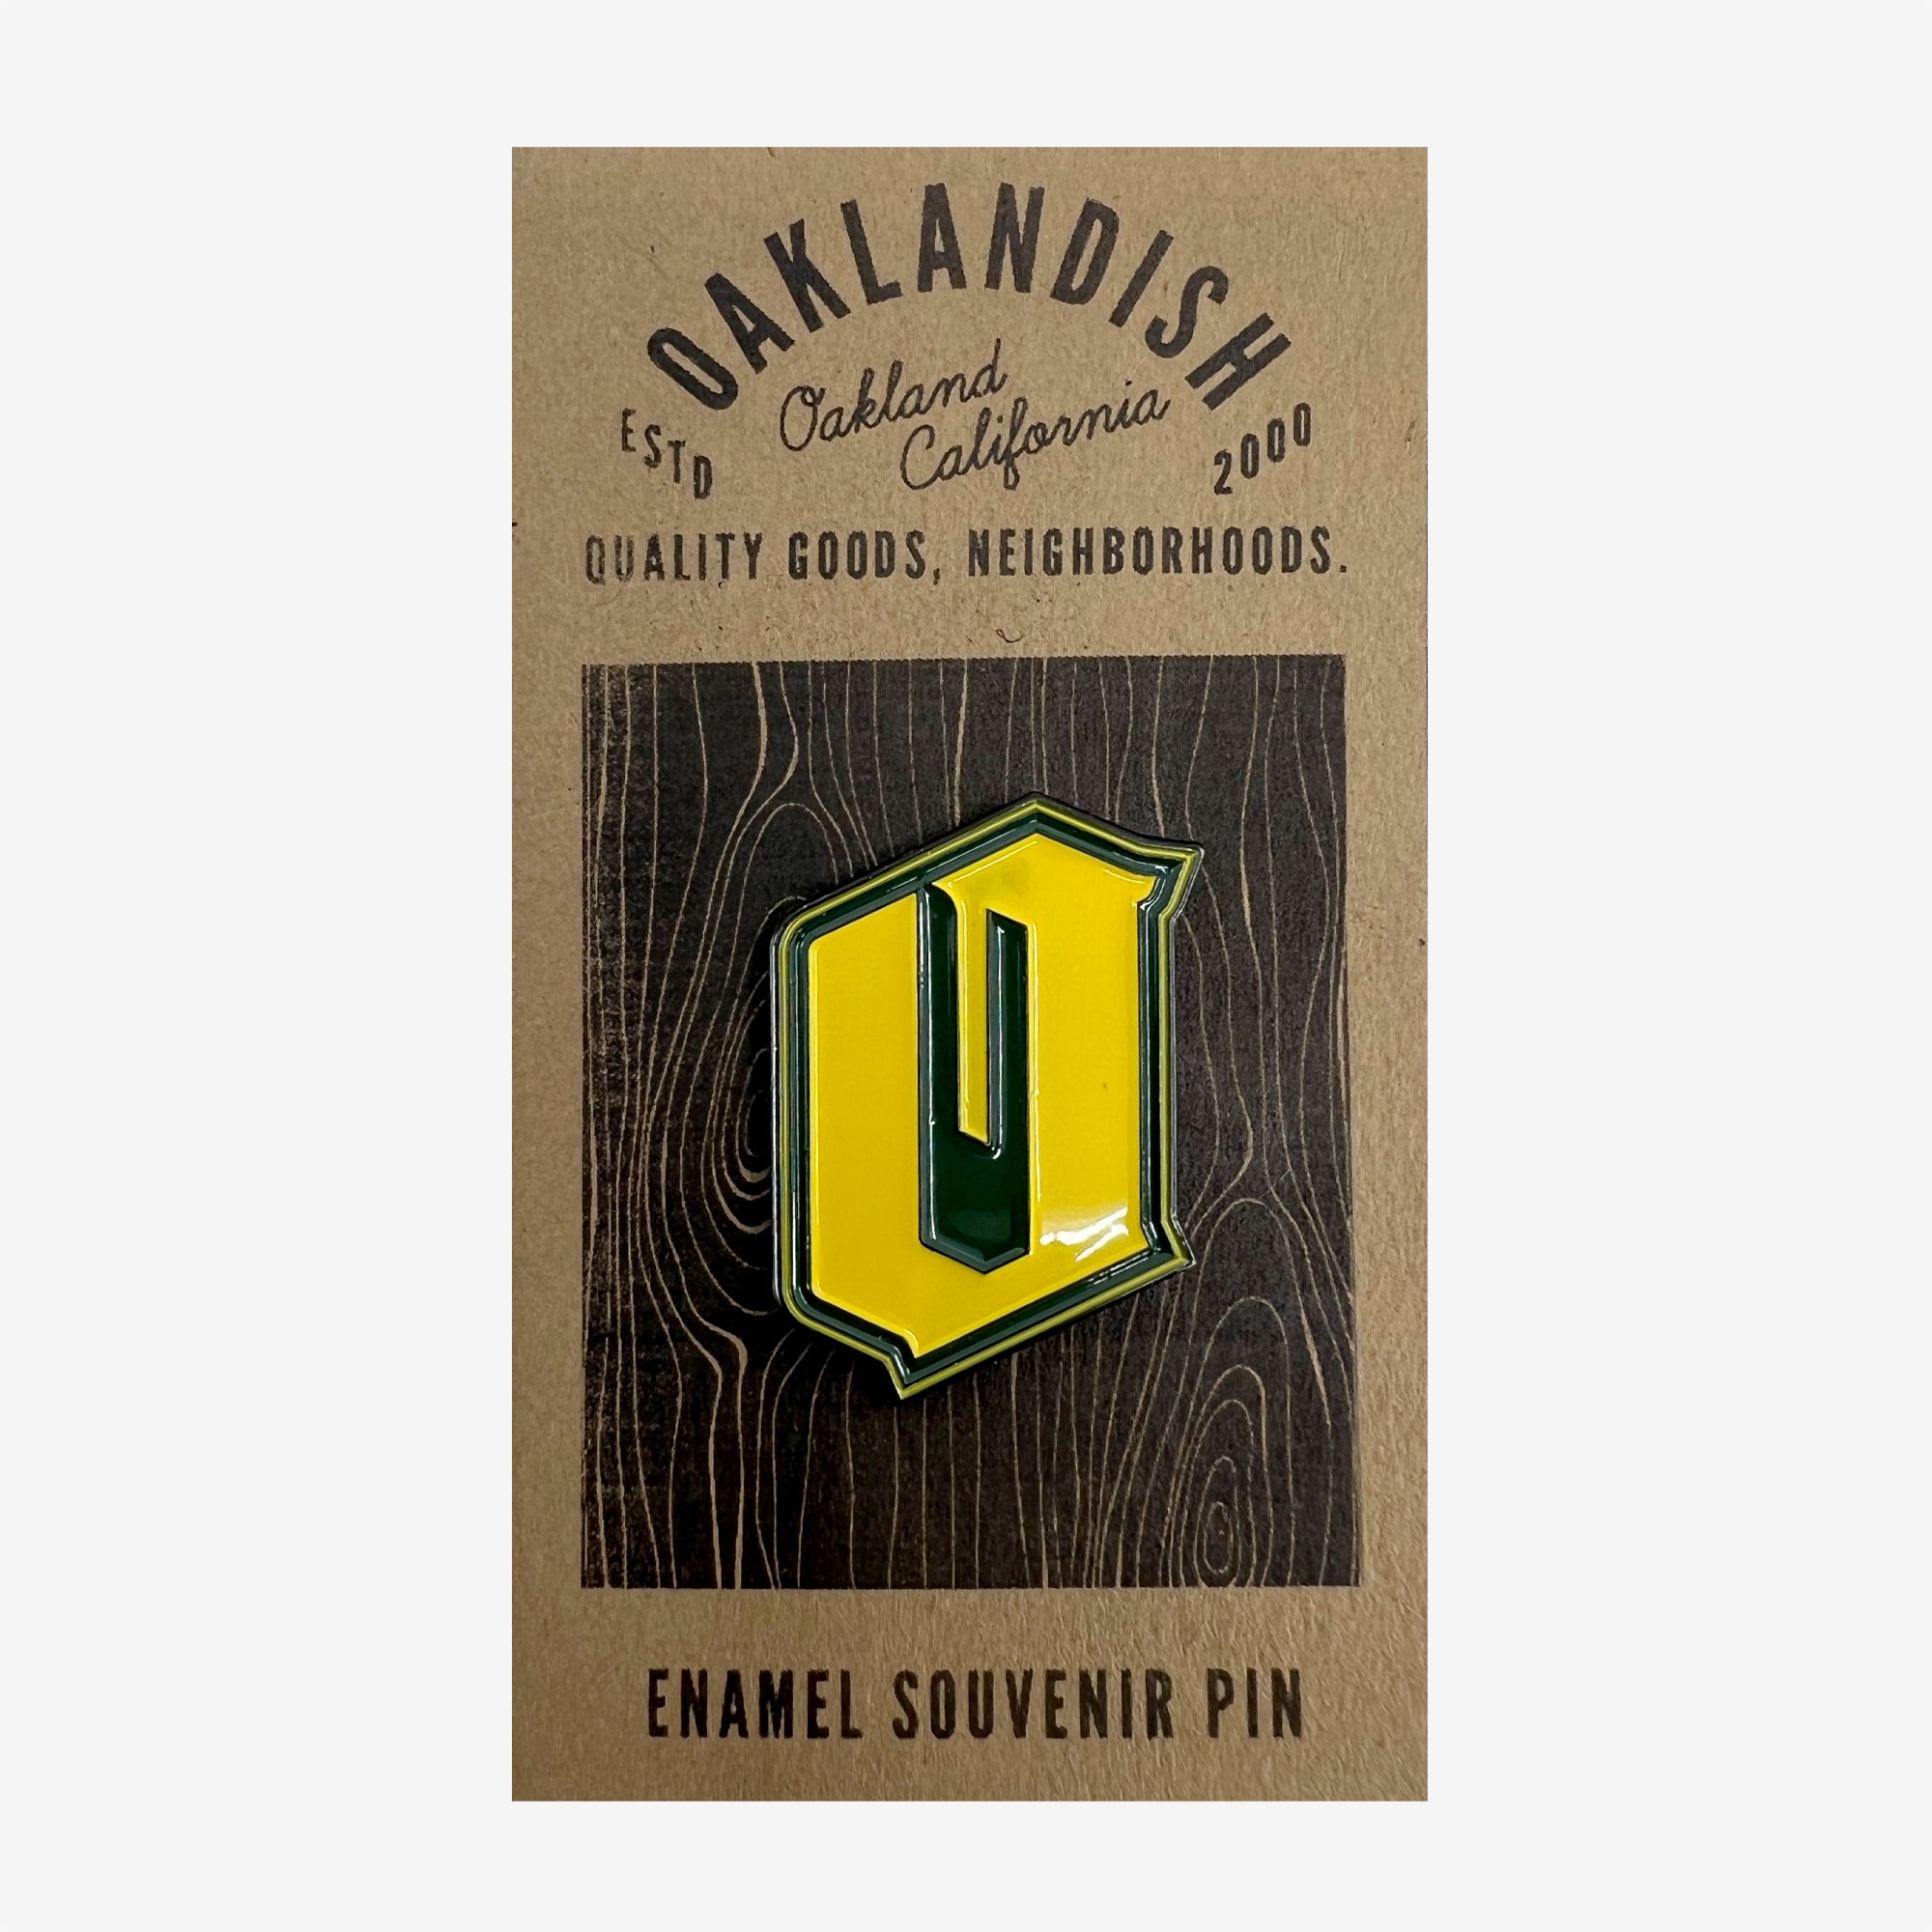 Green and yellow enamel lapel pin with Official O for Oakland on brown paper Oaklandish retail packaging.